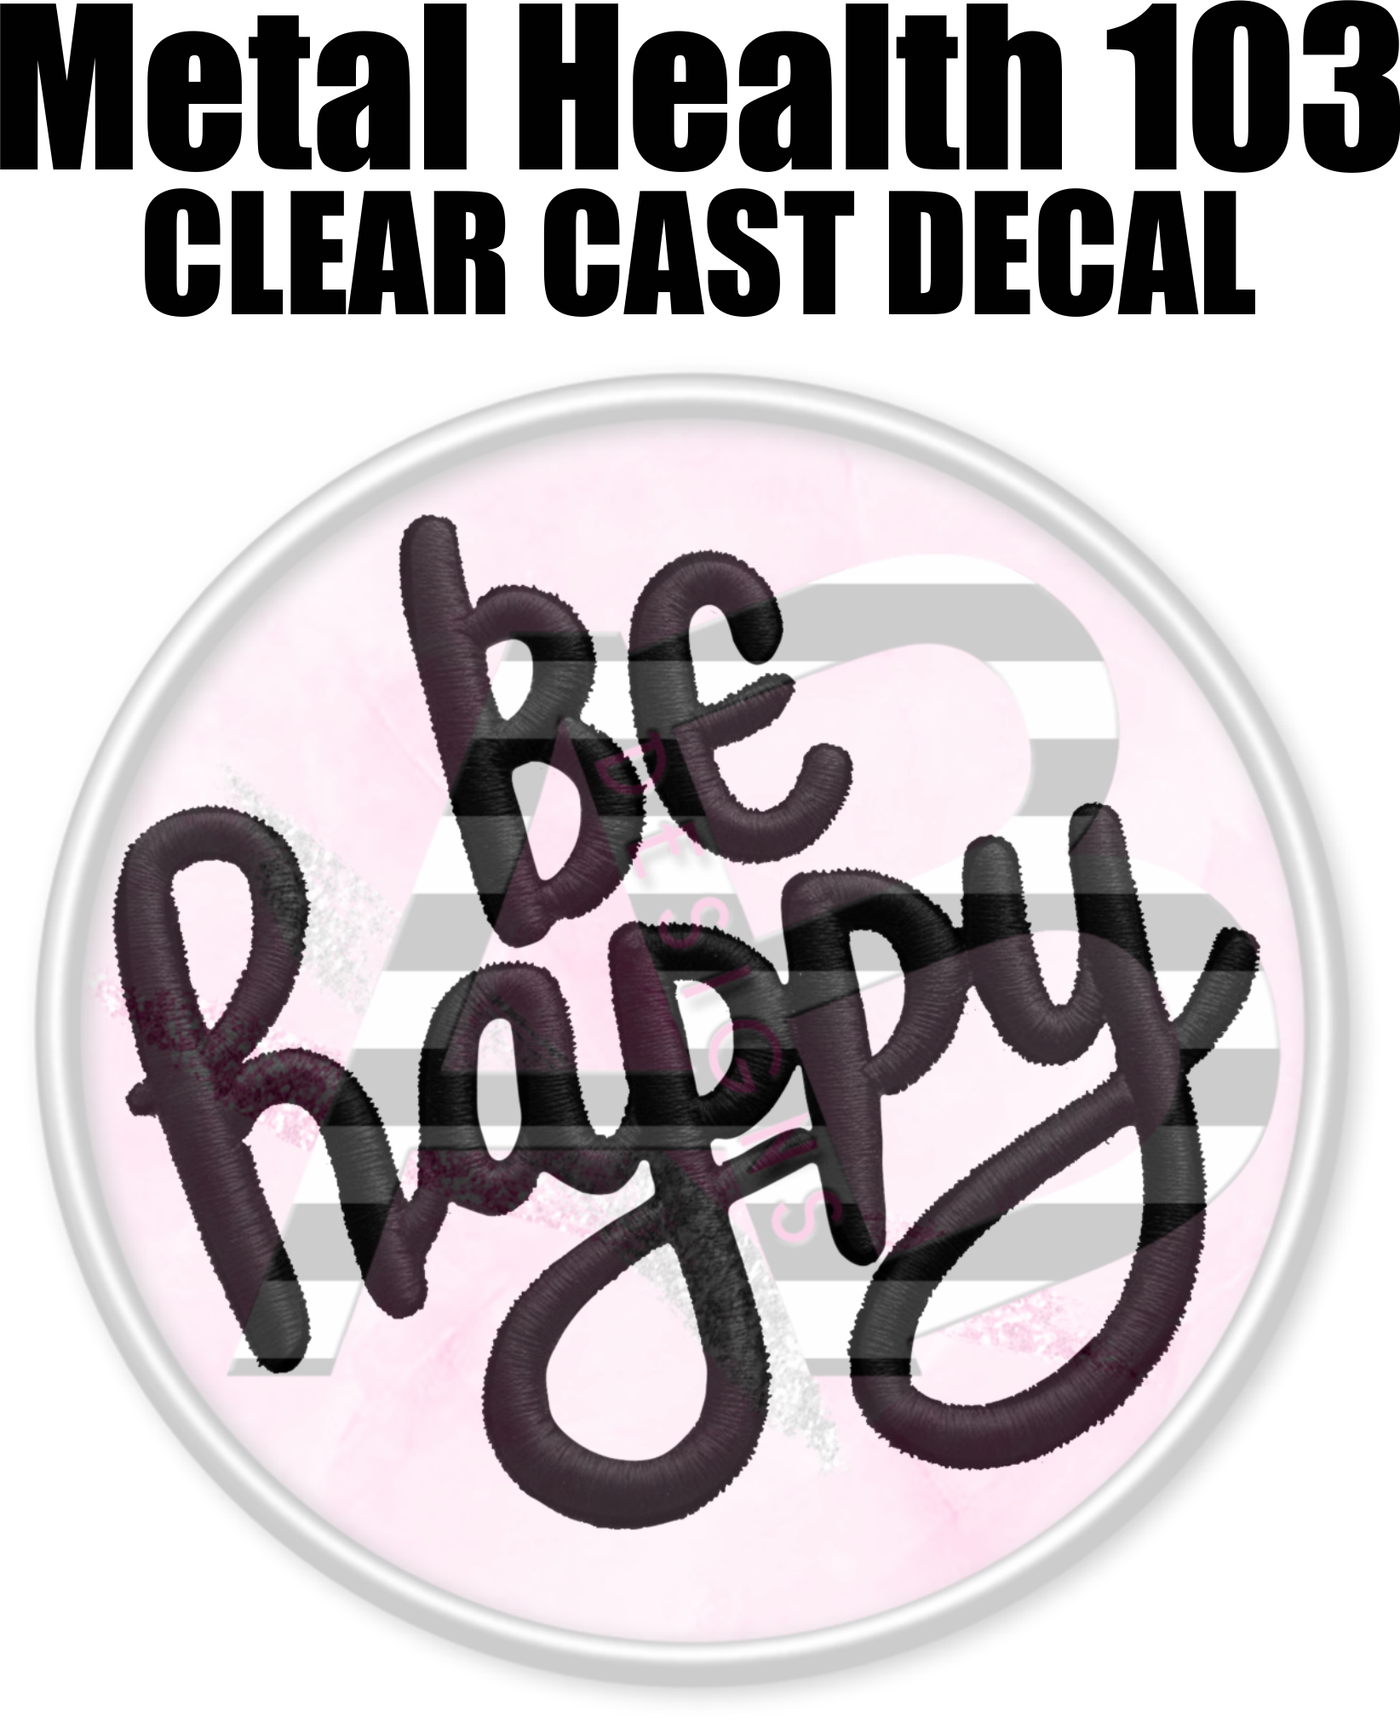 Mental Health 103 - Clear Cast Decal-572